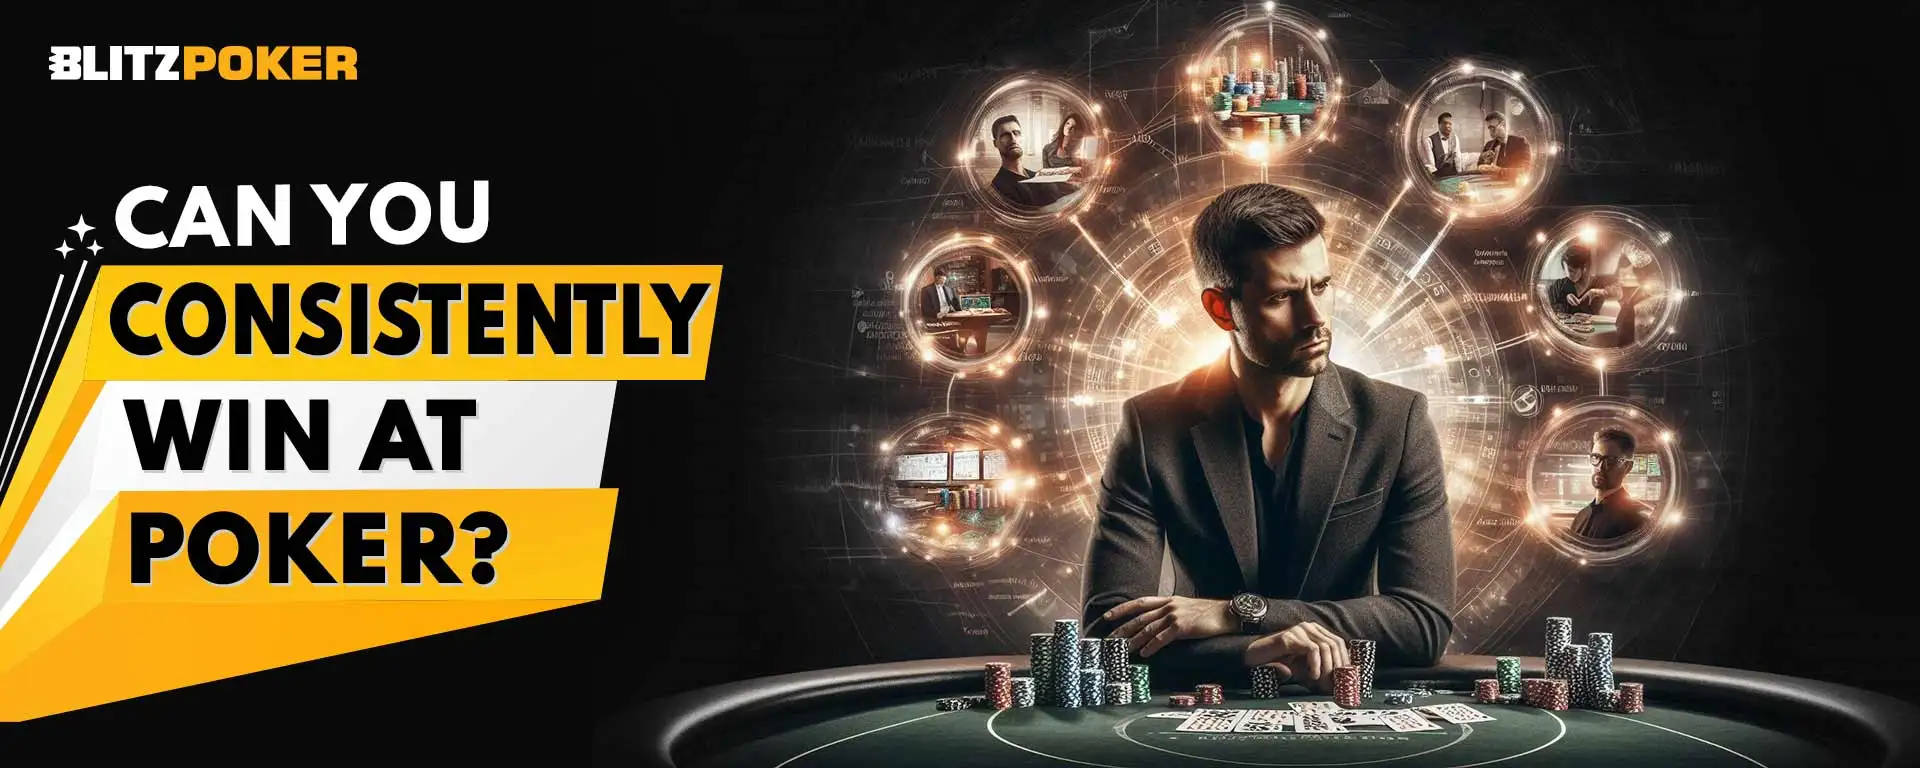 Can You Consistently Win at Poker? Let’s Find Out!